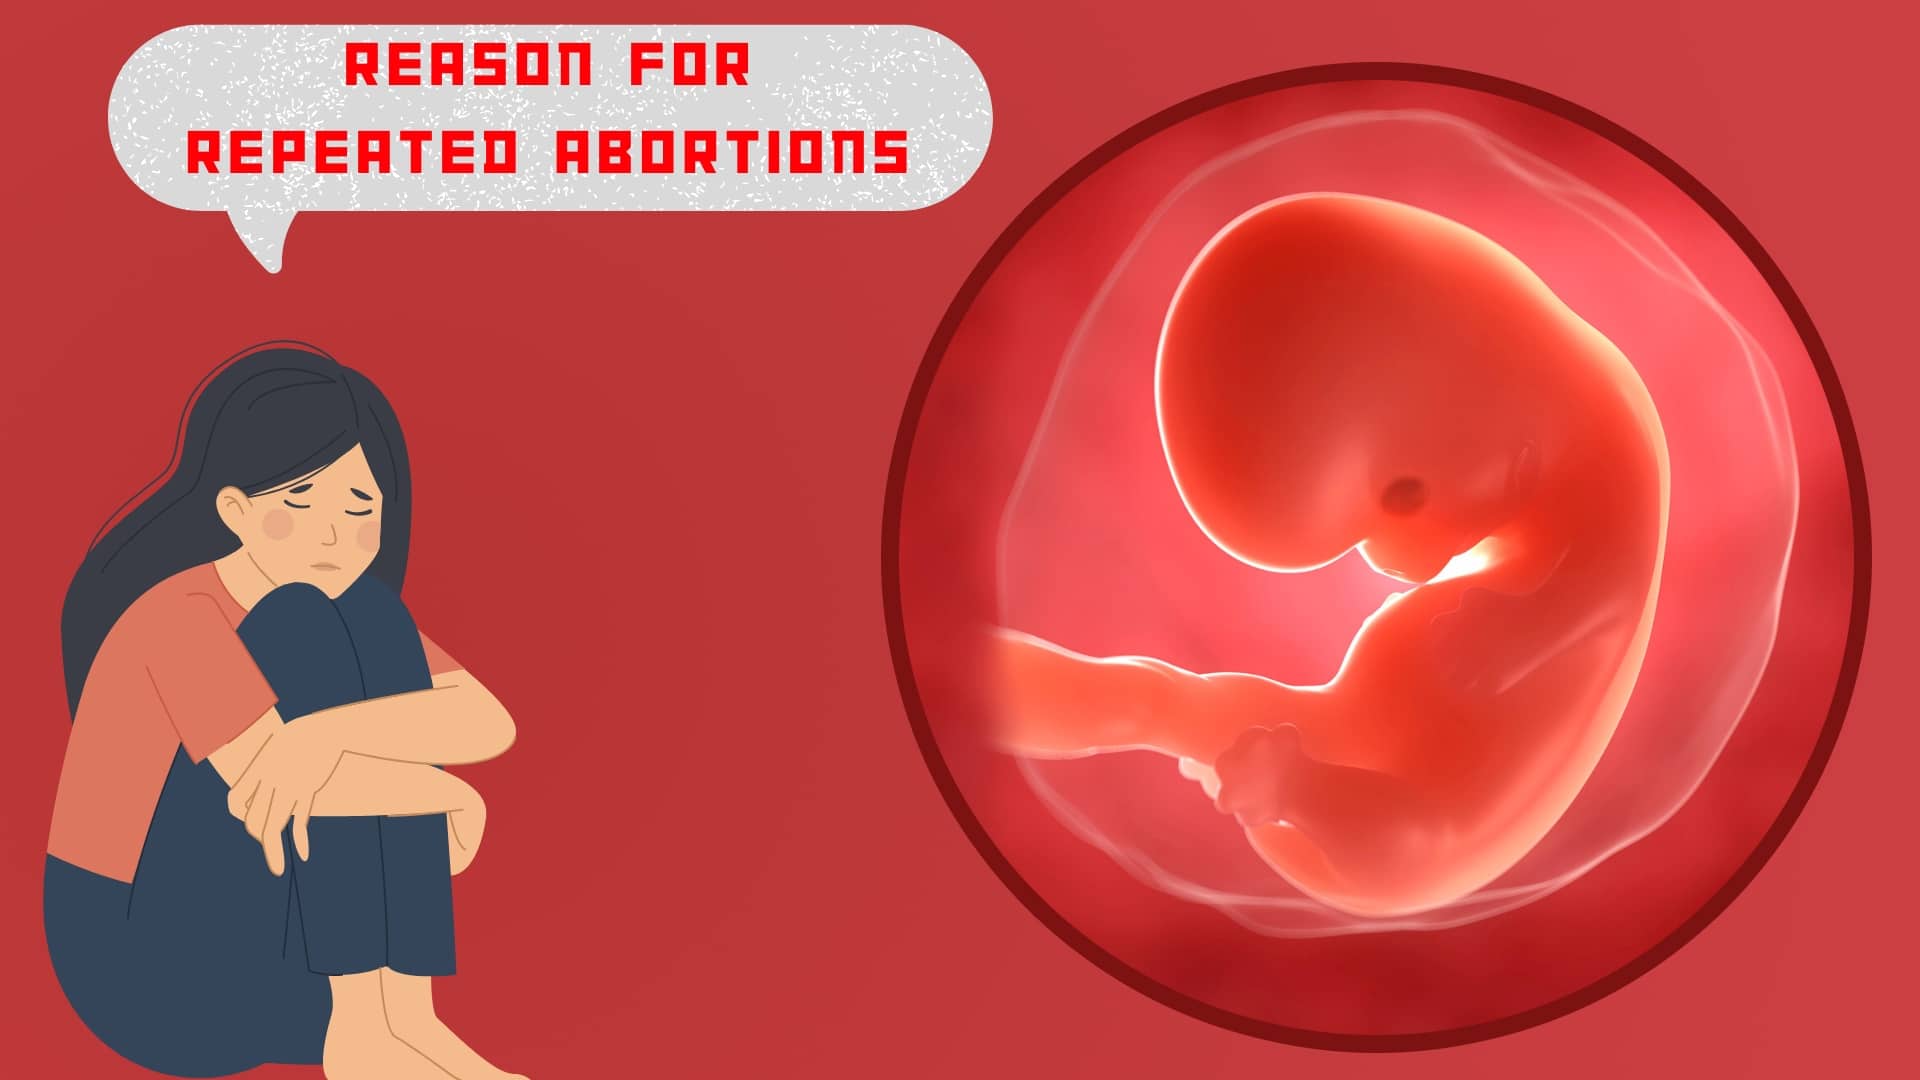 Reasons for repeated abortion